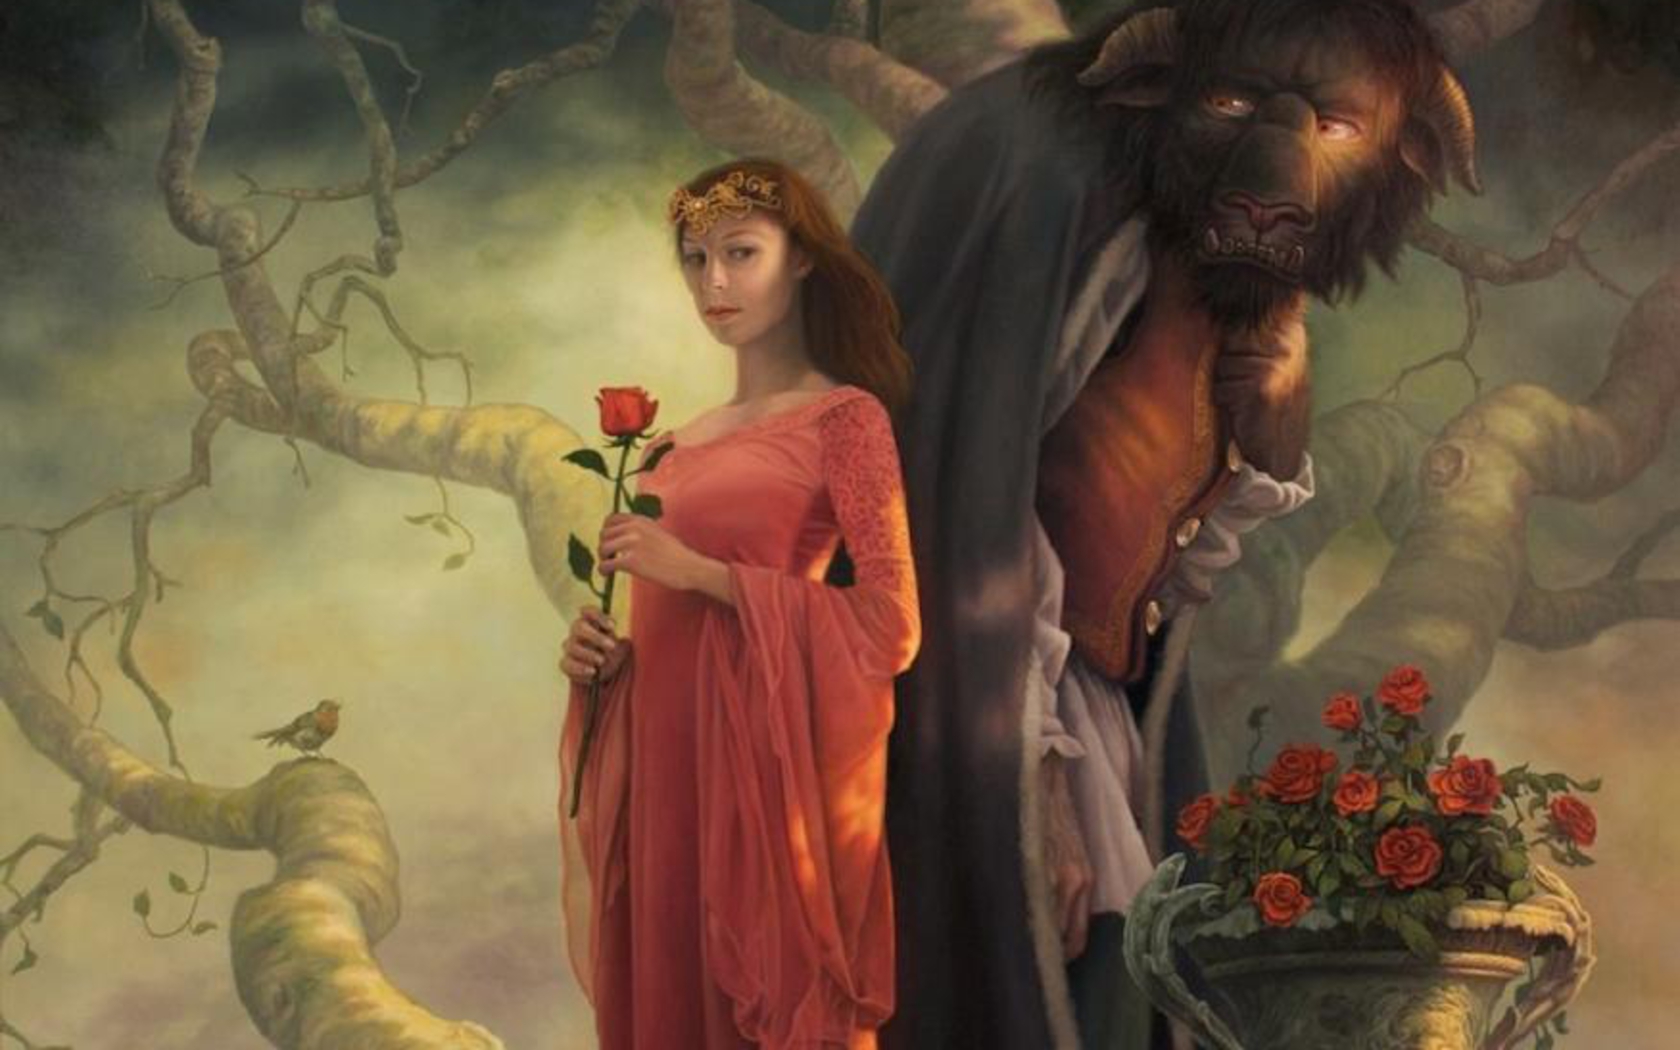 beauty and the beast Computer Wallpapers, Desktop Backgrounds 